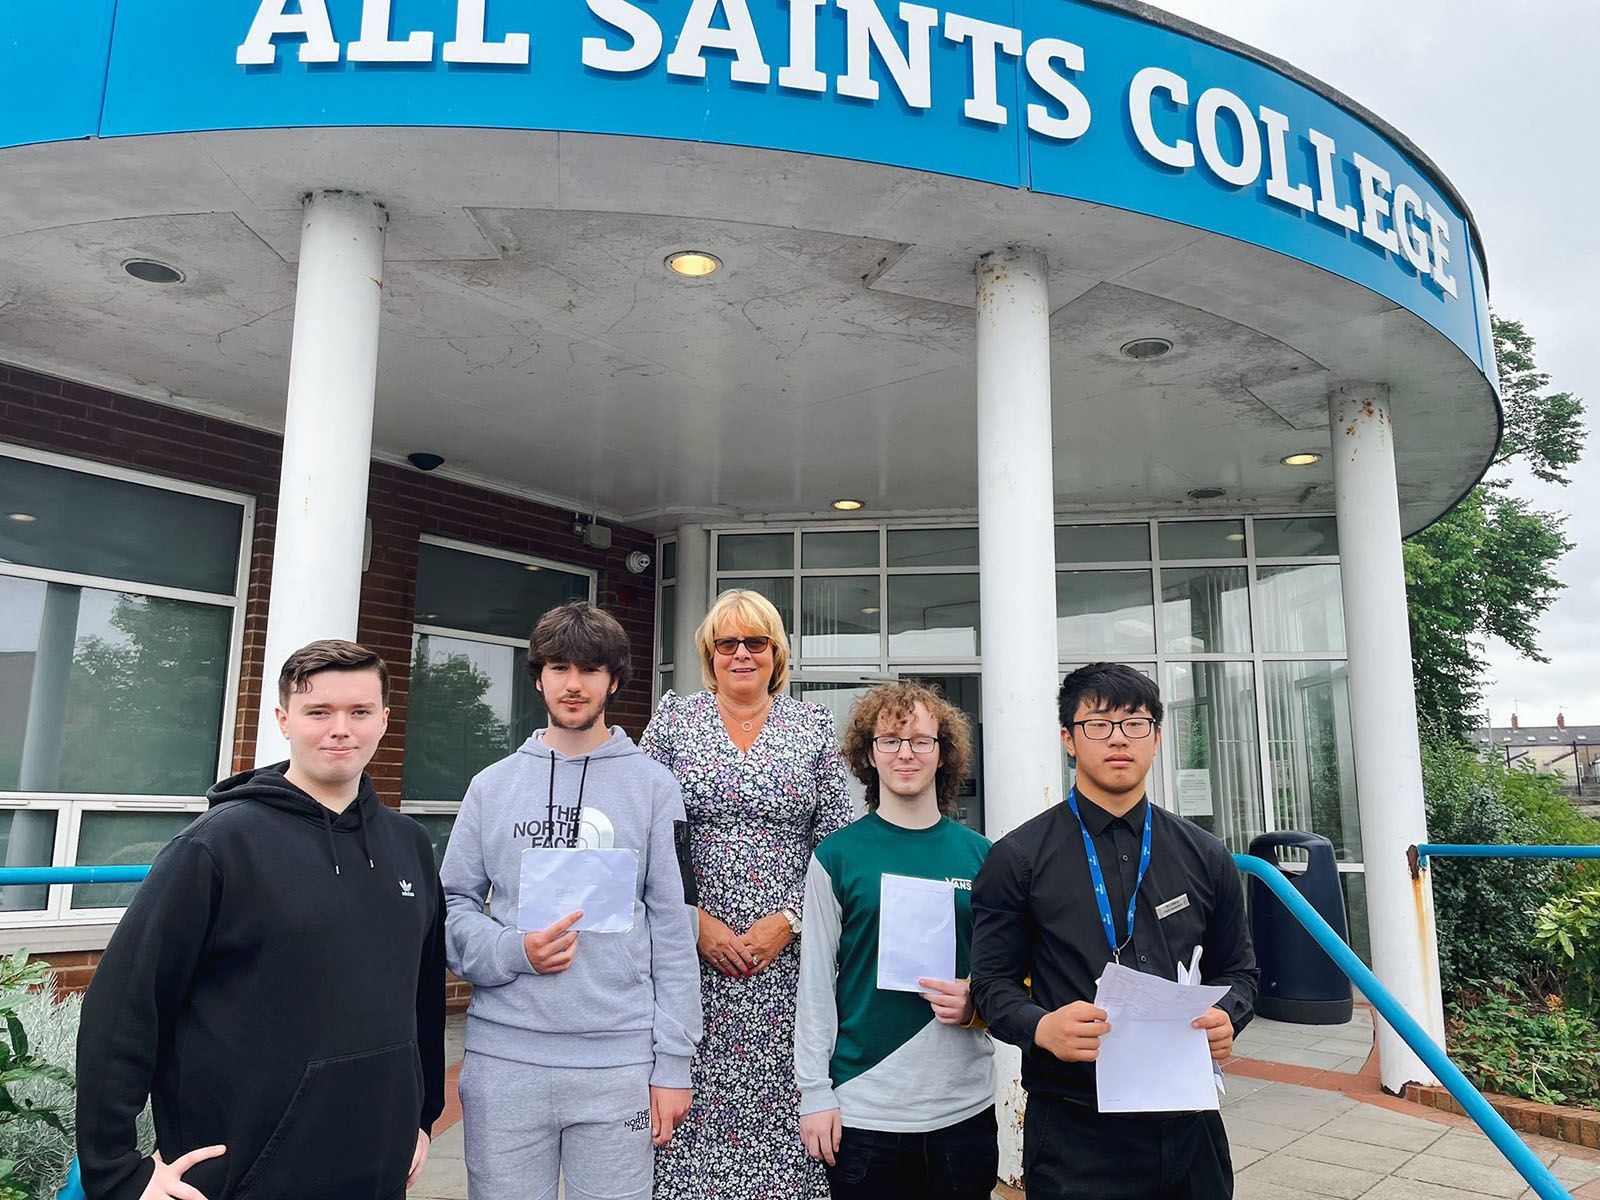 All Saints Principal Bronagh Farrimond and pupils on A-Level results day. She says schools are more focused on pastoral care than ever